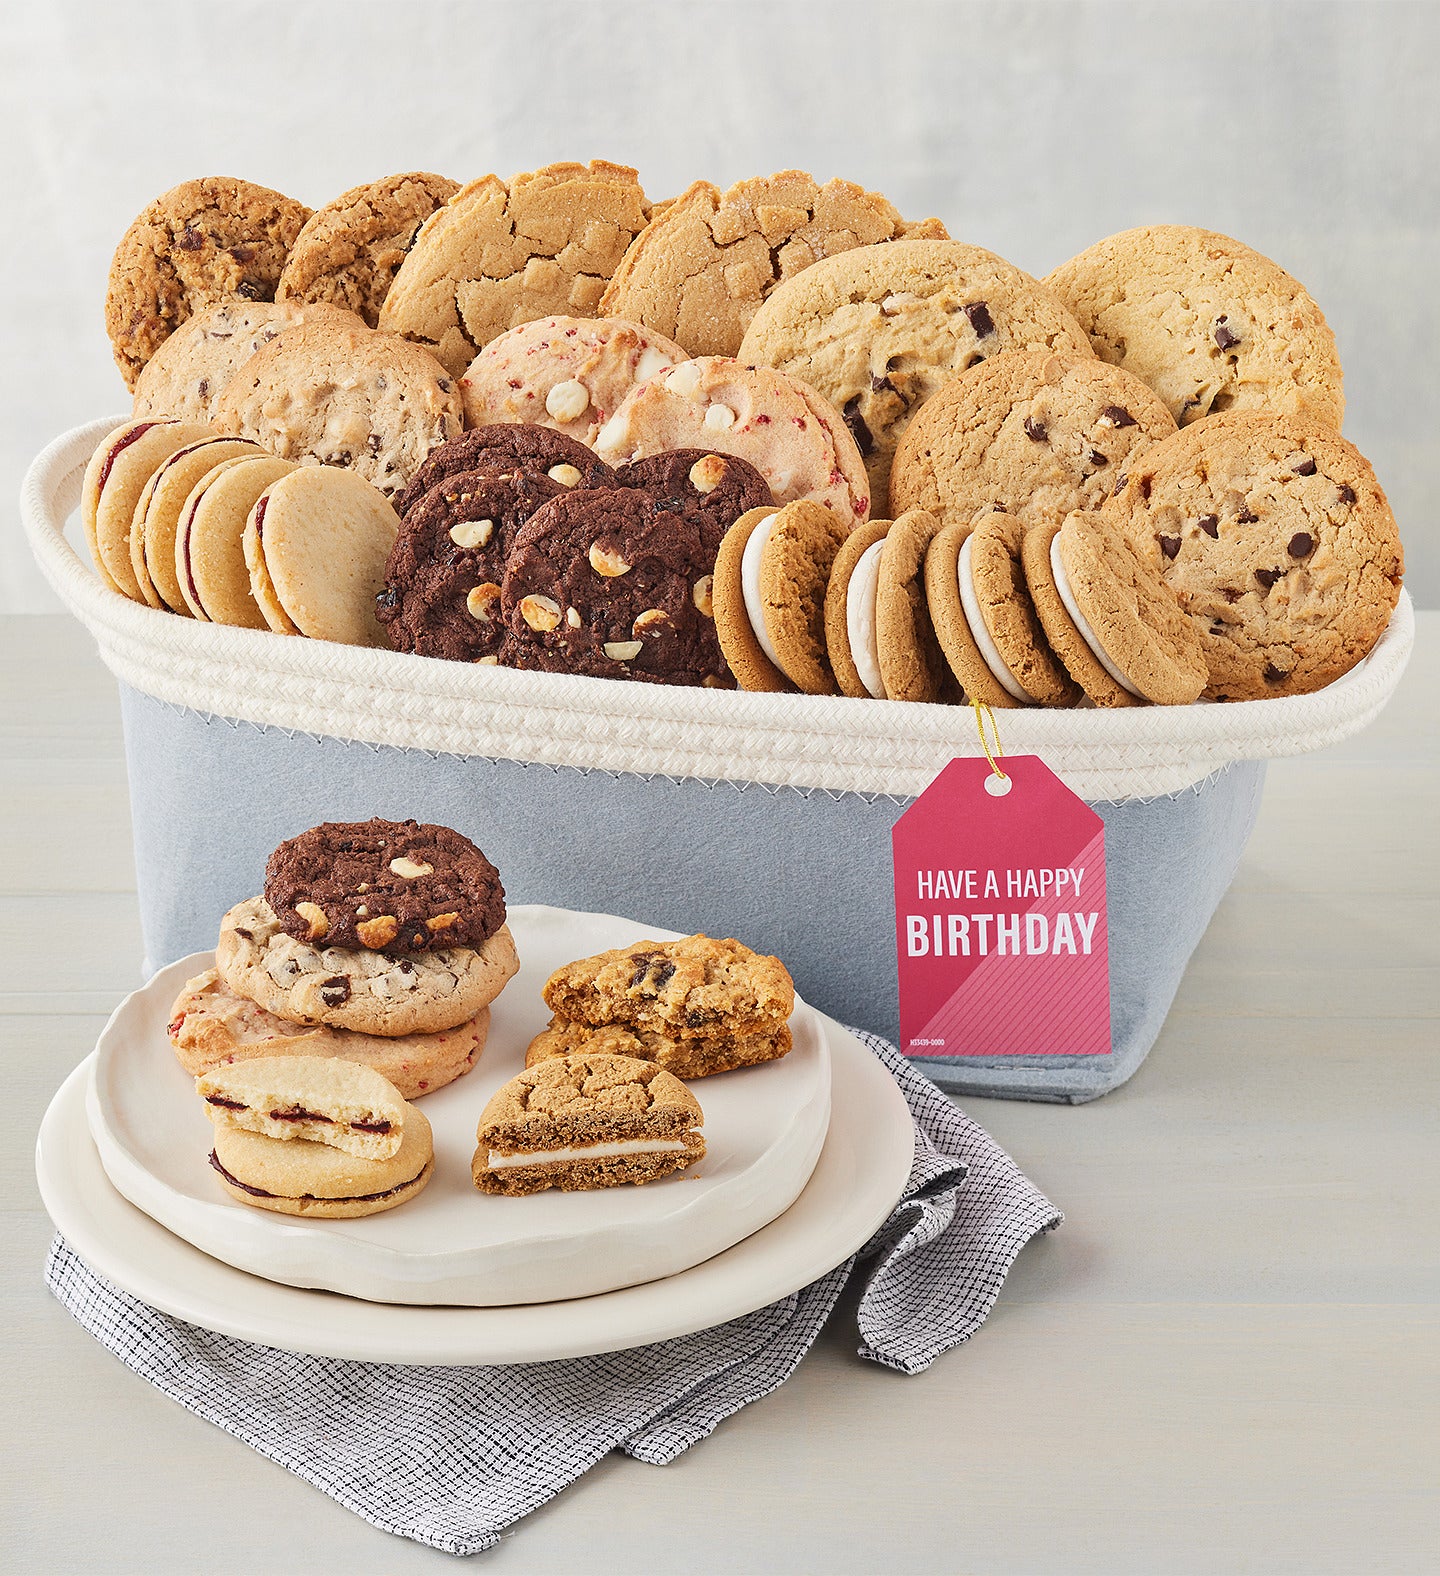 Thank You Gift Basket Delivery: Thank You Cookies & More | Mrs. Fields®